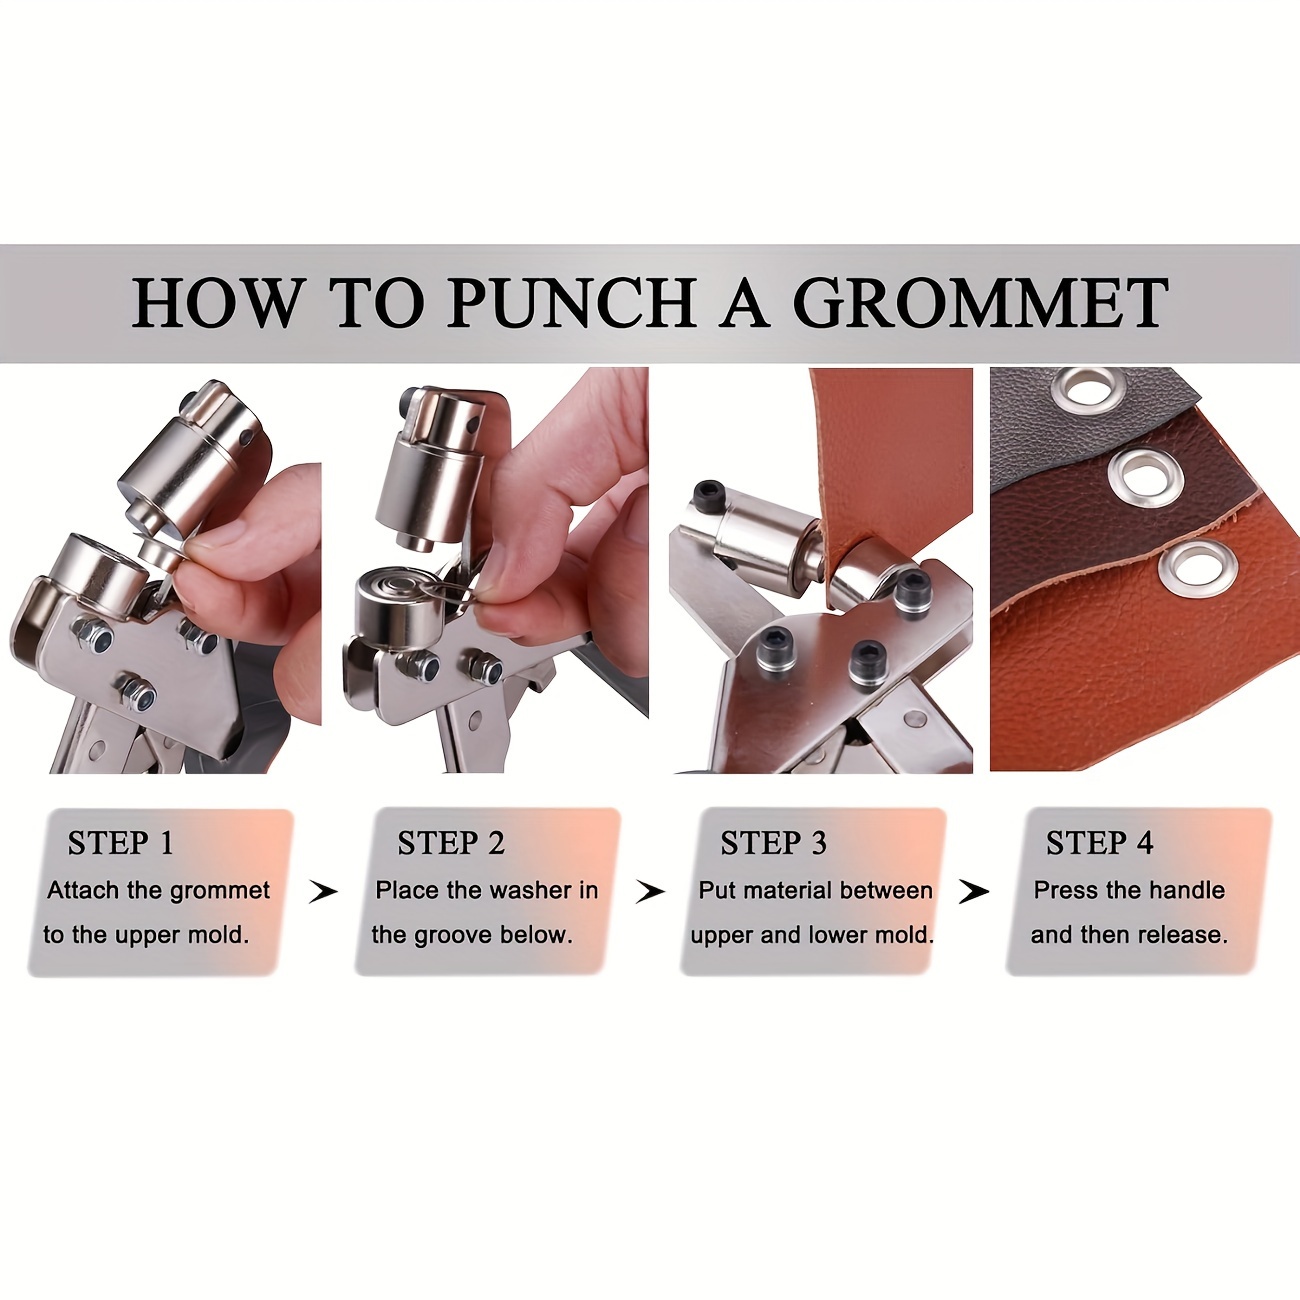 Acymner Handheld Hole Punch Pliers Grommet Tool Kit  Grommet Press  Pliers,Portable Handheld Eyelet Machine with 500PCS Grommets of 3/8 Inch  (10mm) Silver Eyelets